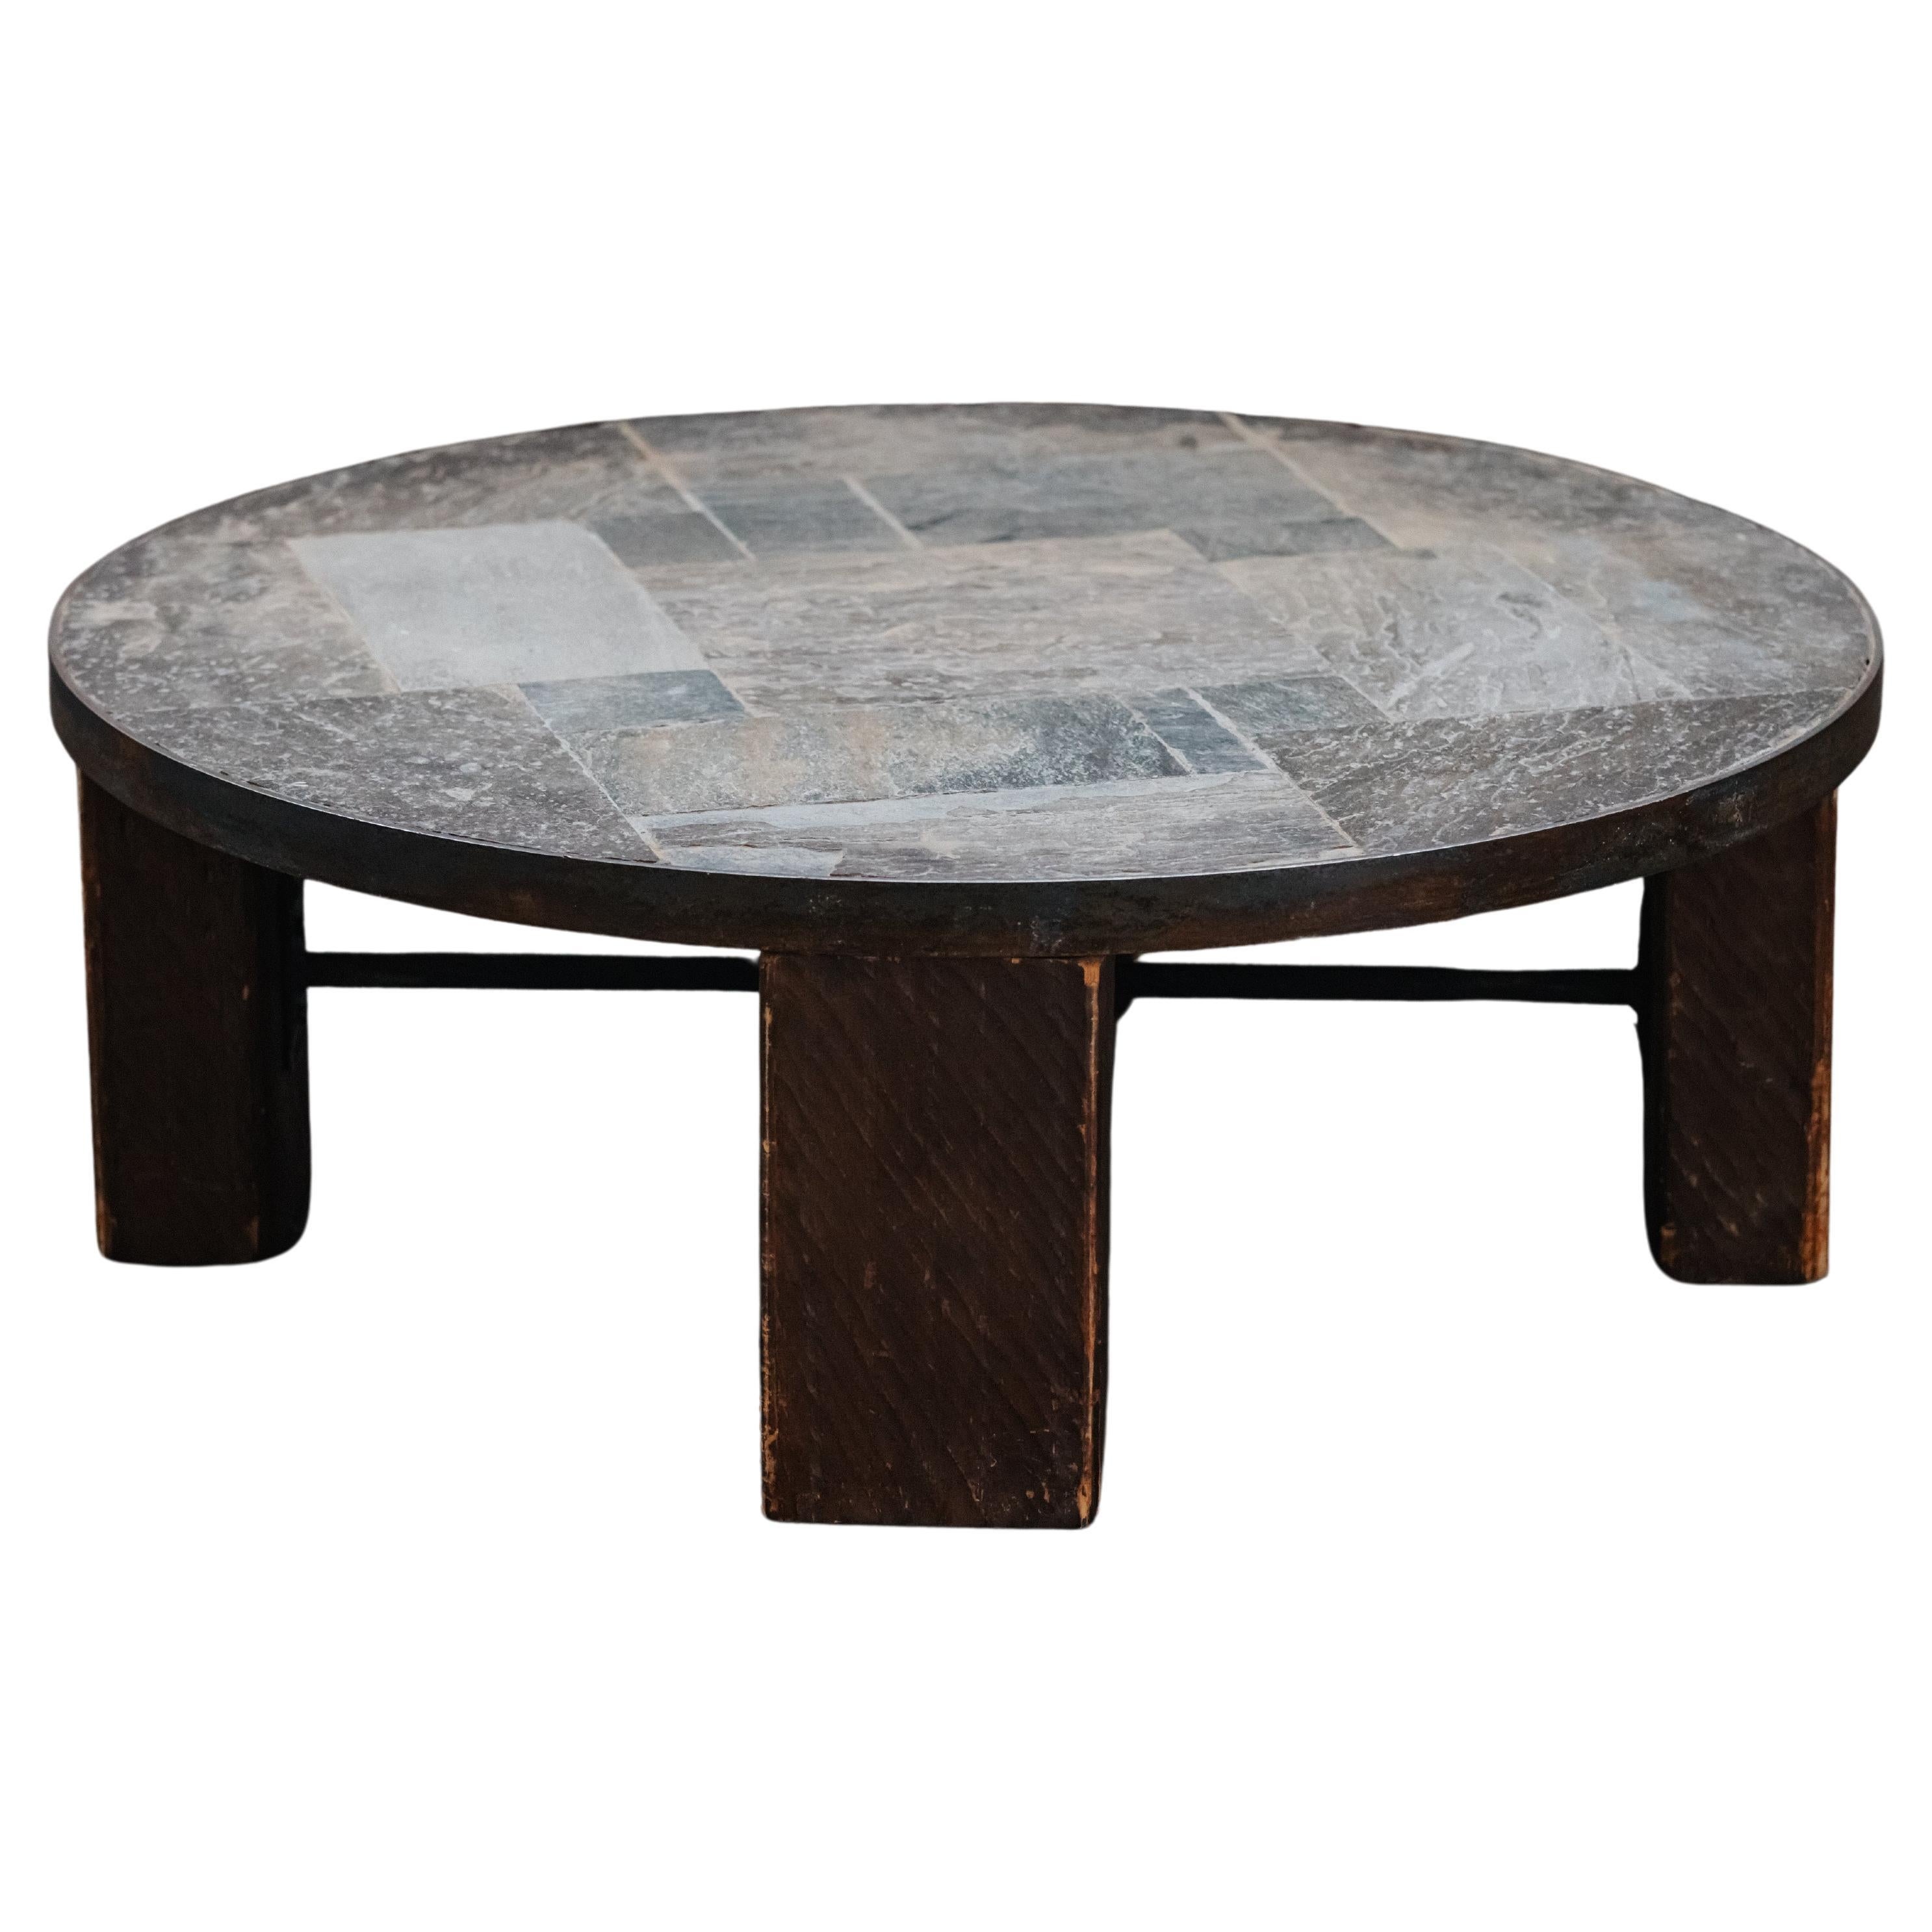 Vintage Stone And Oak Coffee Table From France, Circa 1960 For Sale